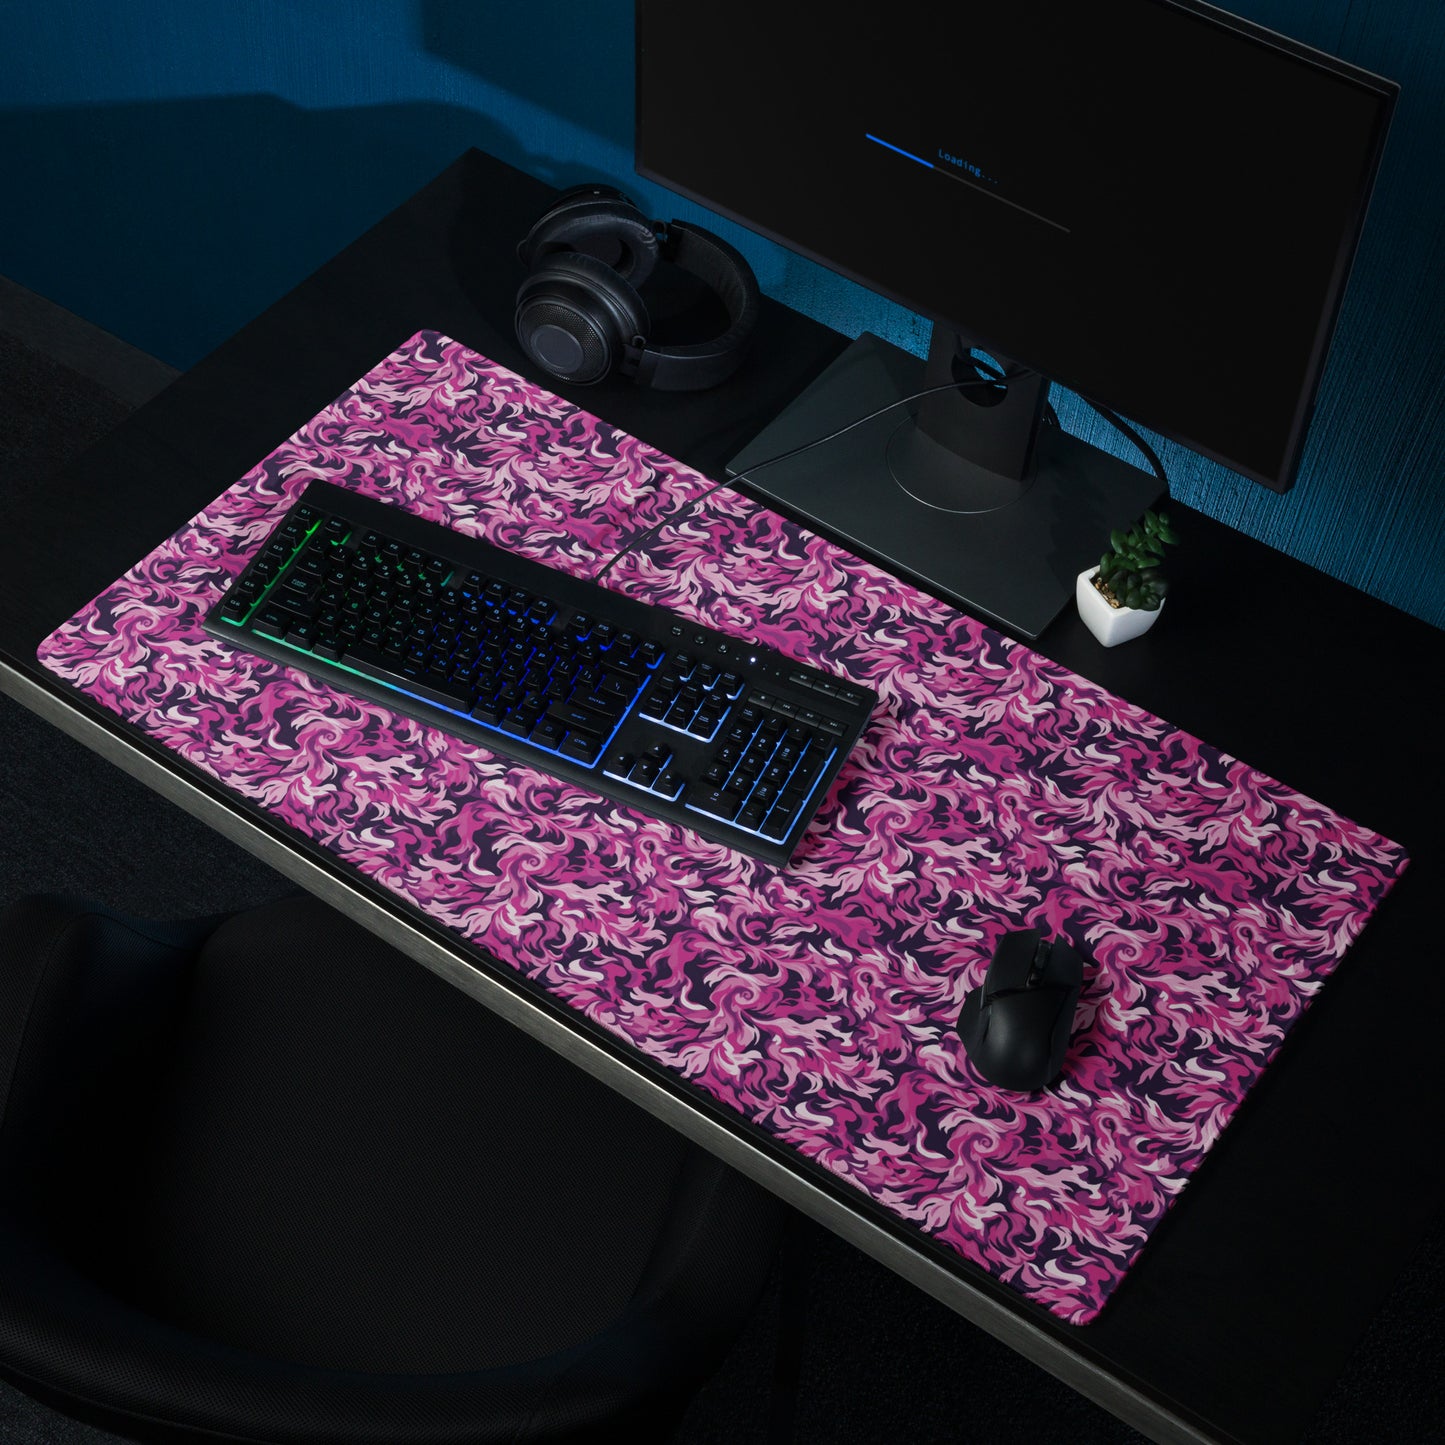 A 36" x 18" desk pad with a pink and magenta camo pattern sitting on a desk.